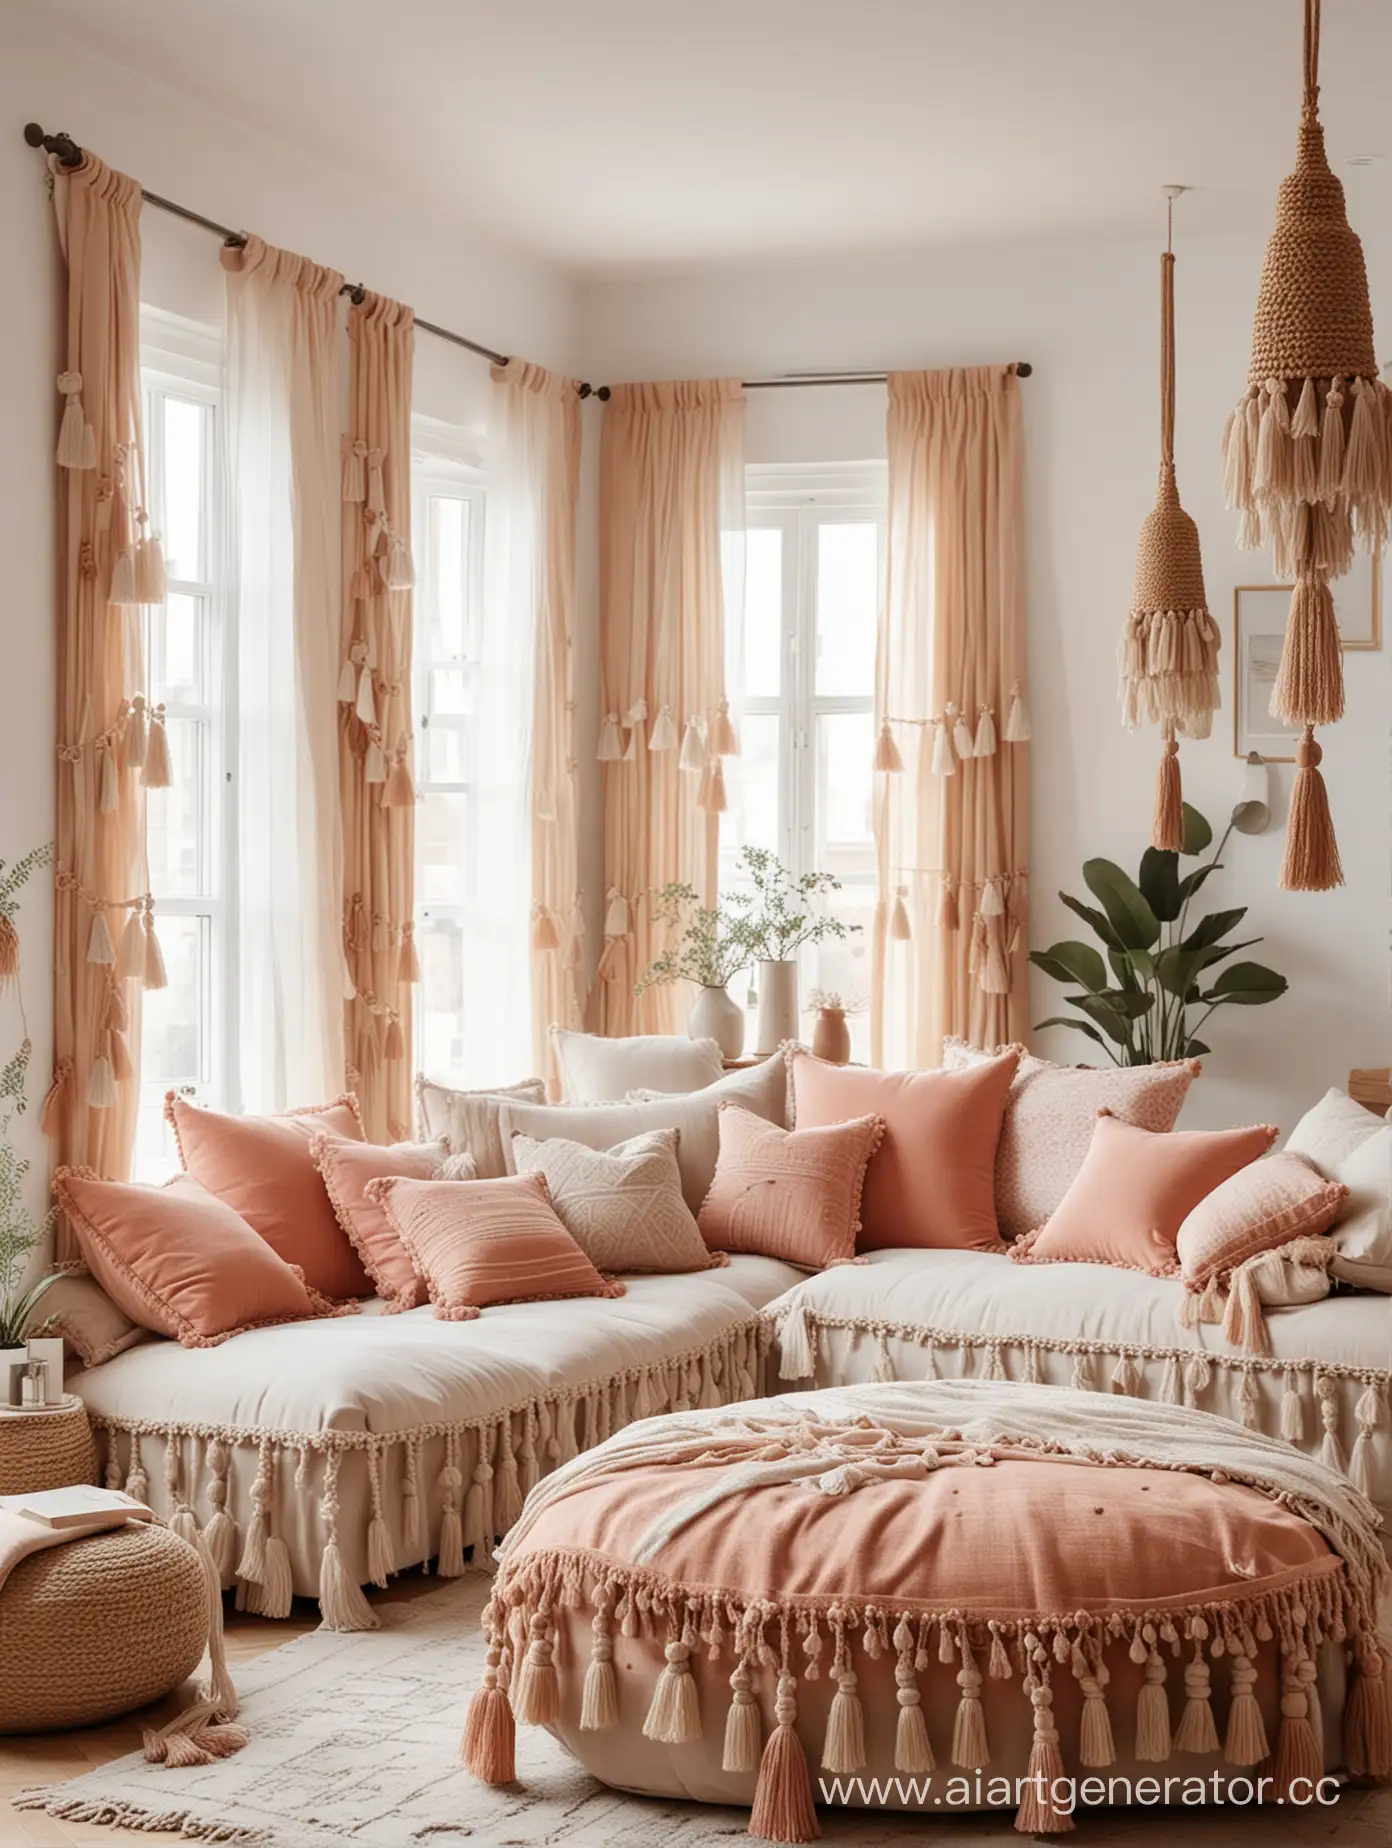 Cozy-Spacious-Room-with-Fabric-Items-and-Decorative-Pillows